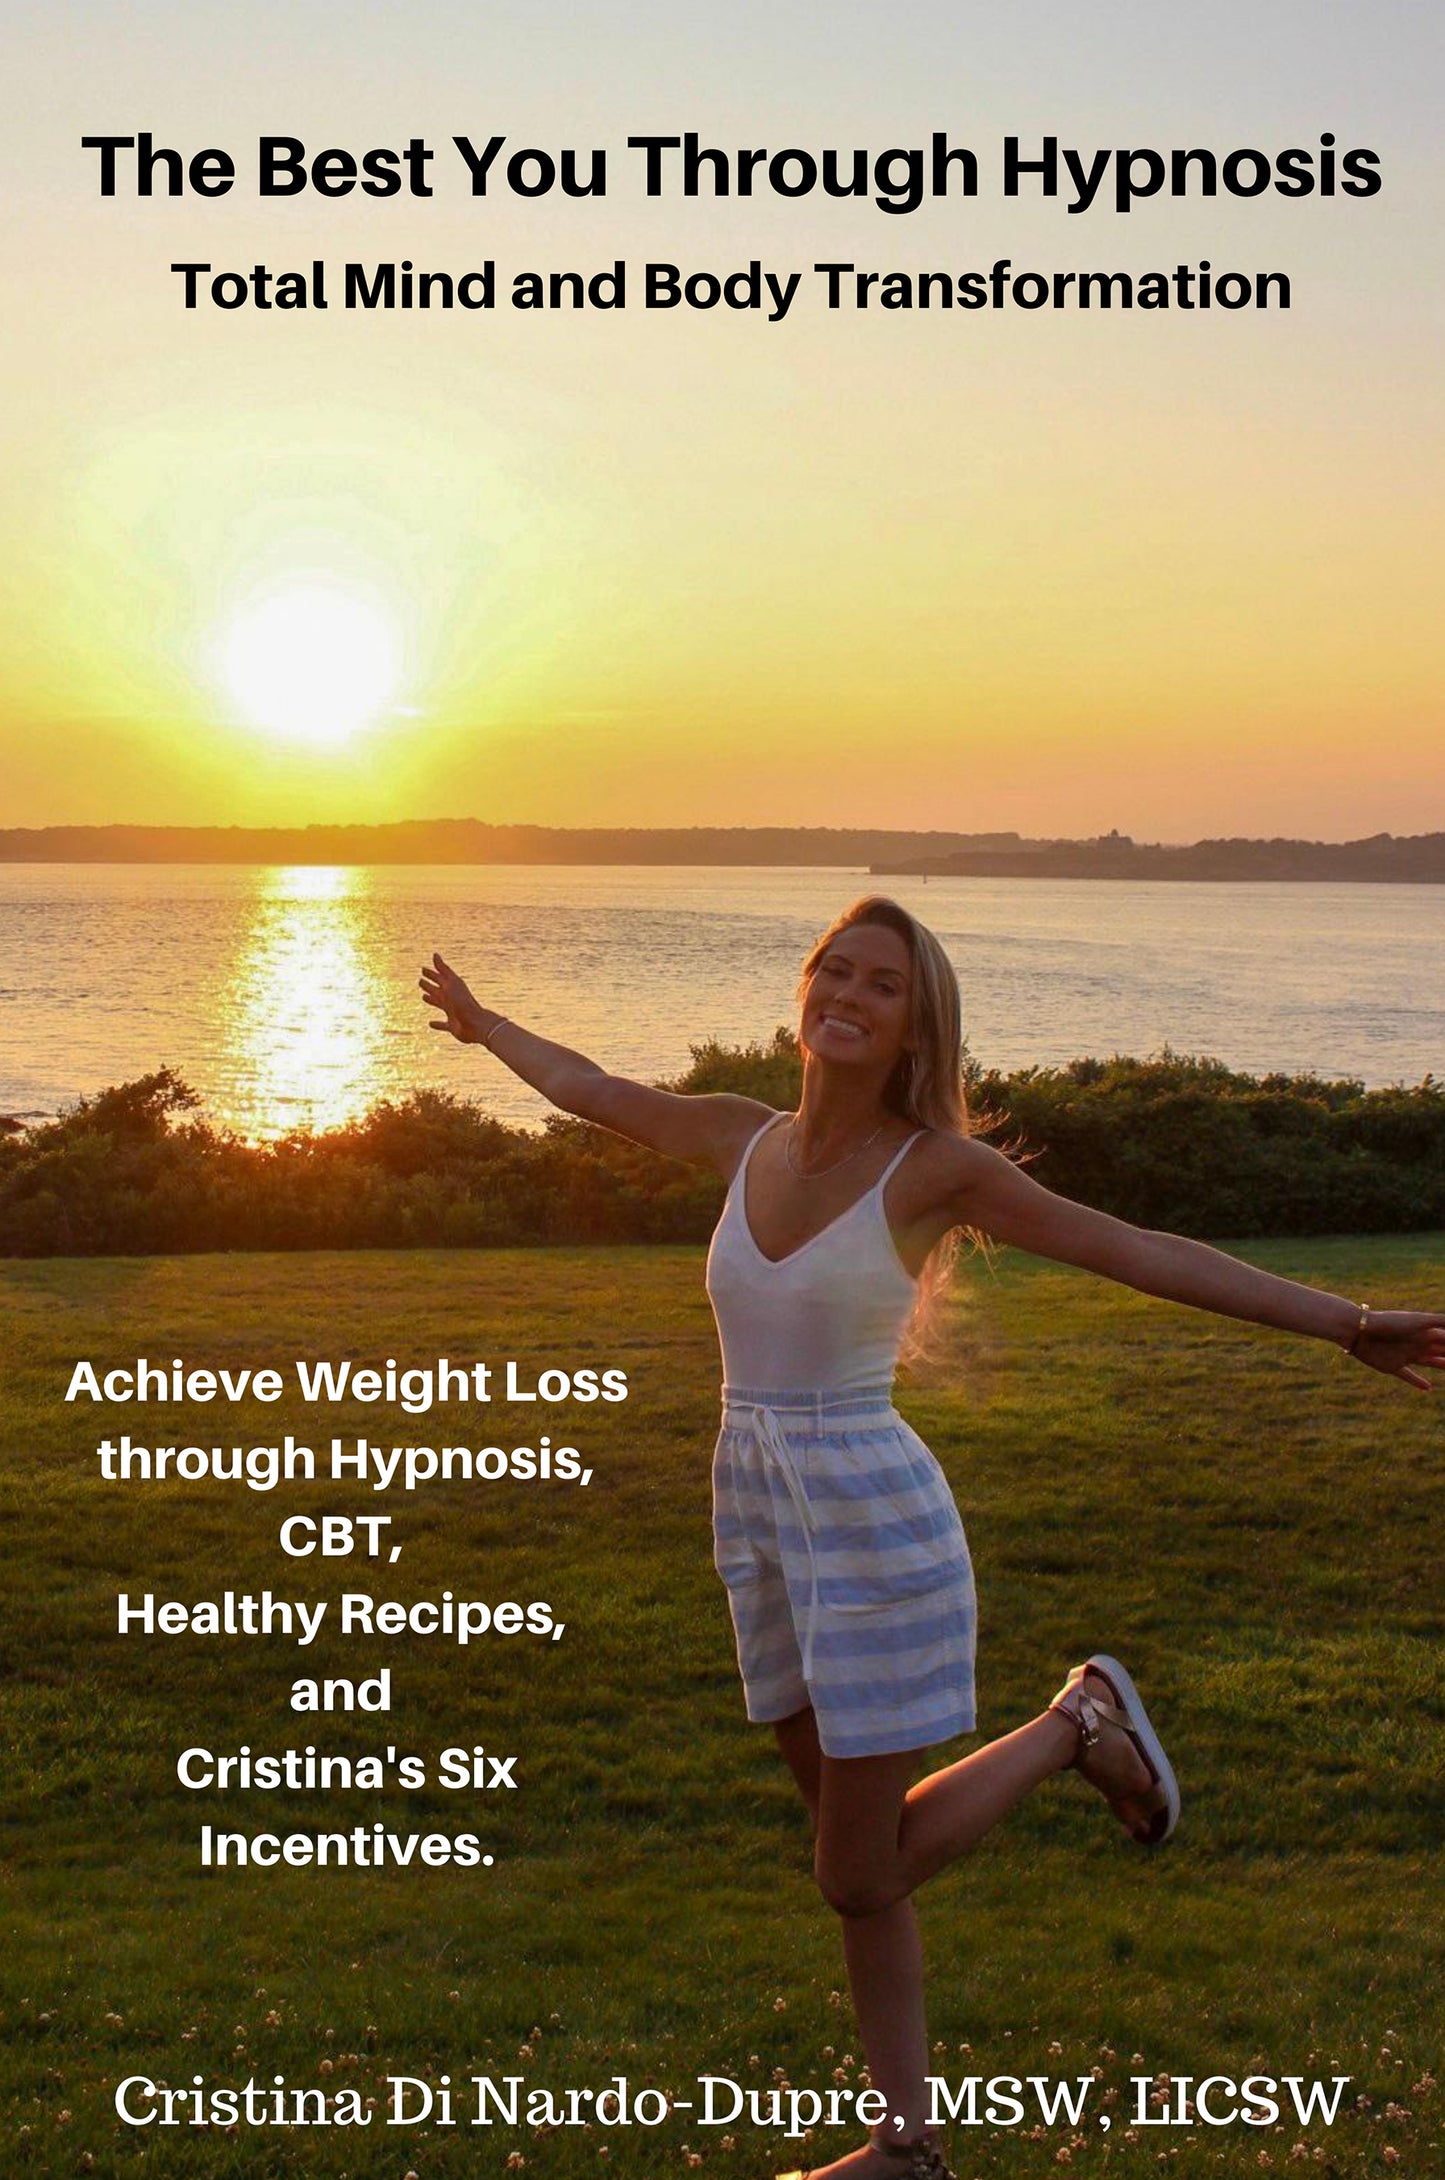 The Best You Through Hypnosis: Total Mind and Body Transformation